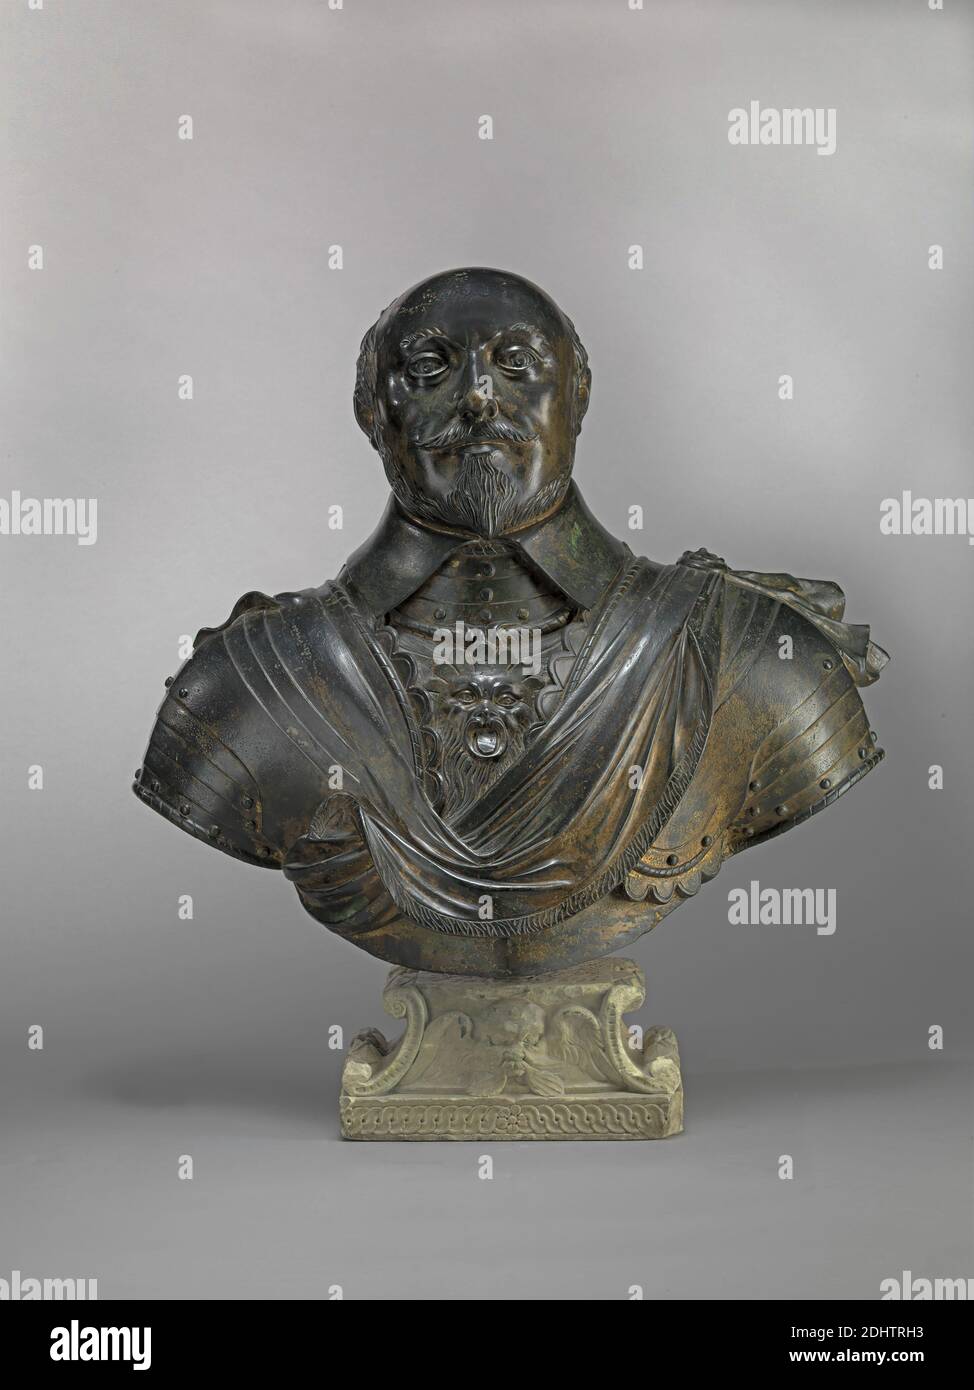 Bust of a Man, unknown artist, after Hubert Le Sueur, 1610–1651, French, active in Britain (1626–41), Formerly Hubert Le Sueur, 1610–1651, French, active in Britain (1626–41), ca. 1640 or mid-19th century, Bronze, with traces of gilding (on marble base), Overall: 27 1/2 x 24 x 12 inches (69.9 x 61 x 30.5 cm), armor, bald, man, portrait Stock Photo